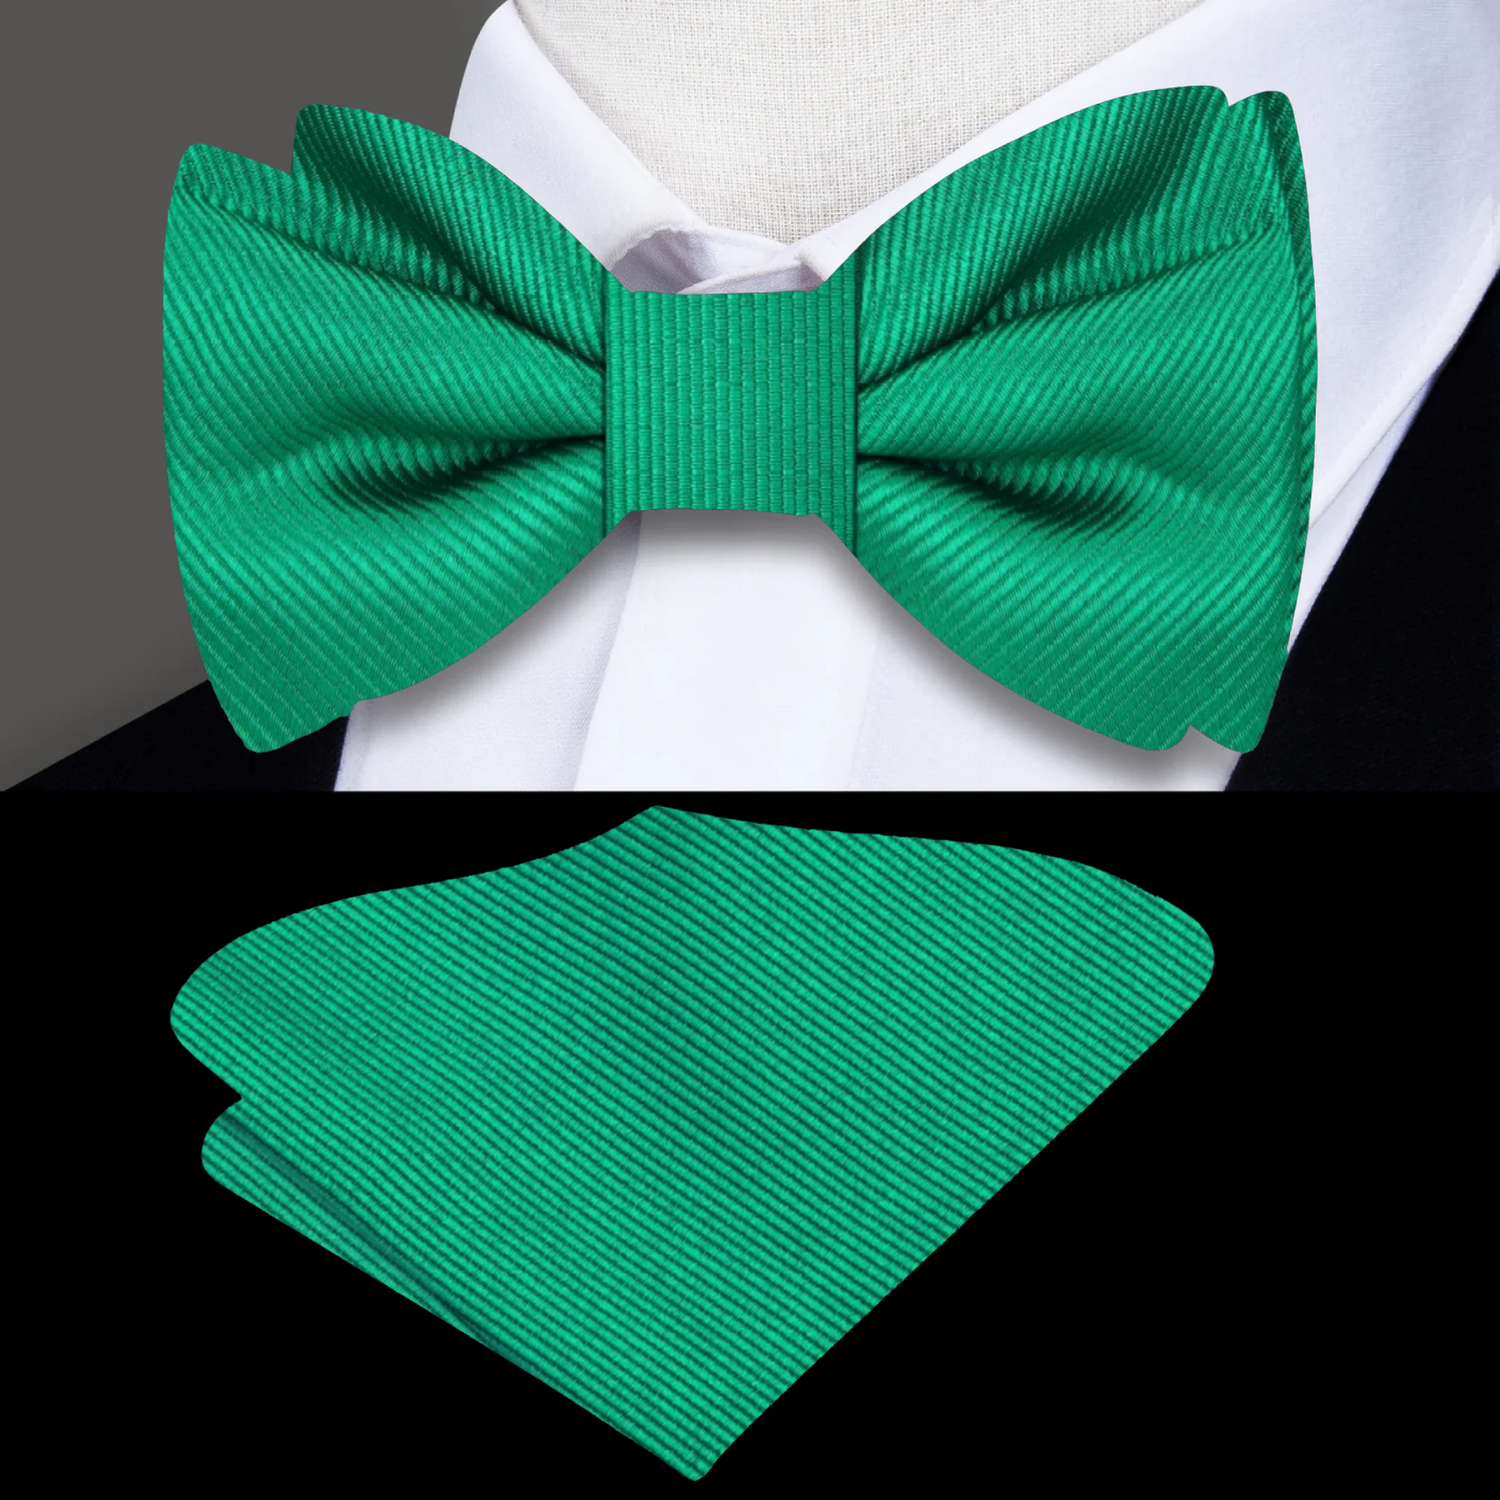 Main: A Green Solid Pattern Silk Self Tie Bow Tie, Matching Pocket Square